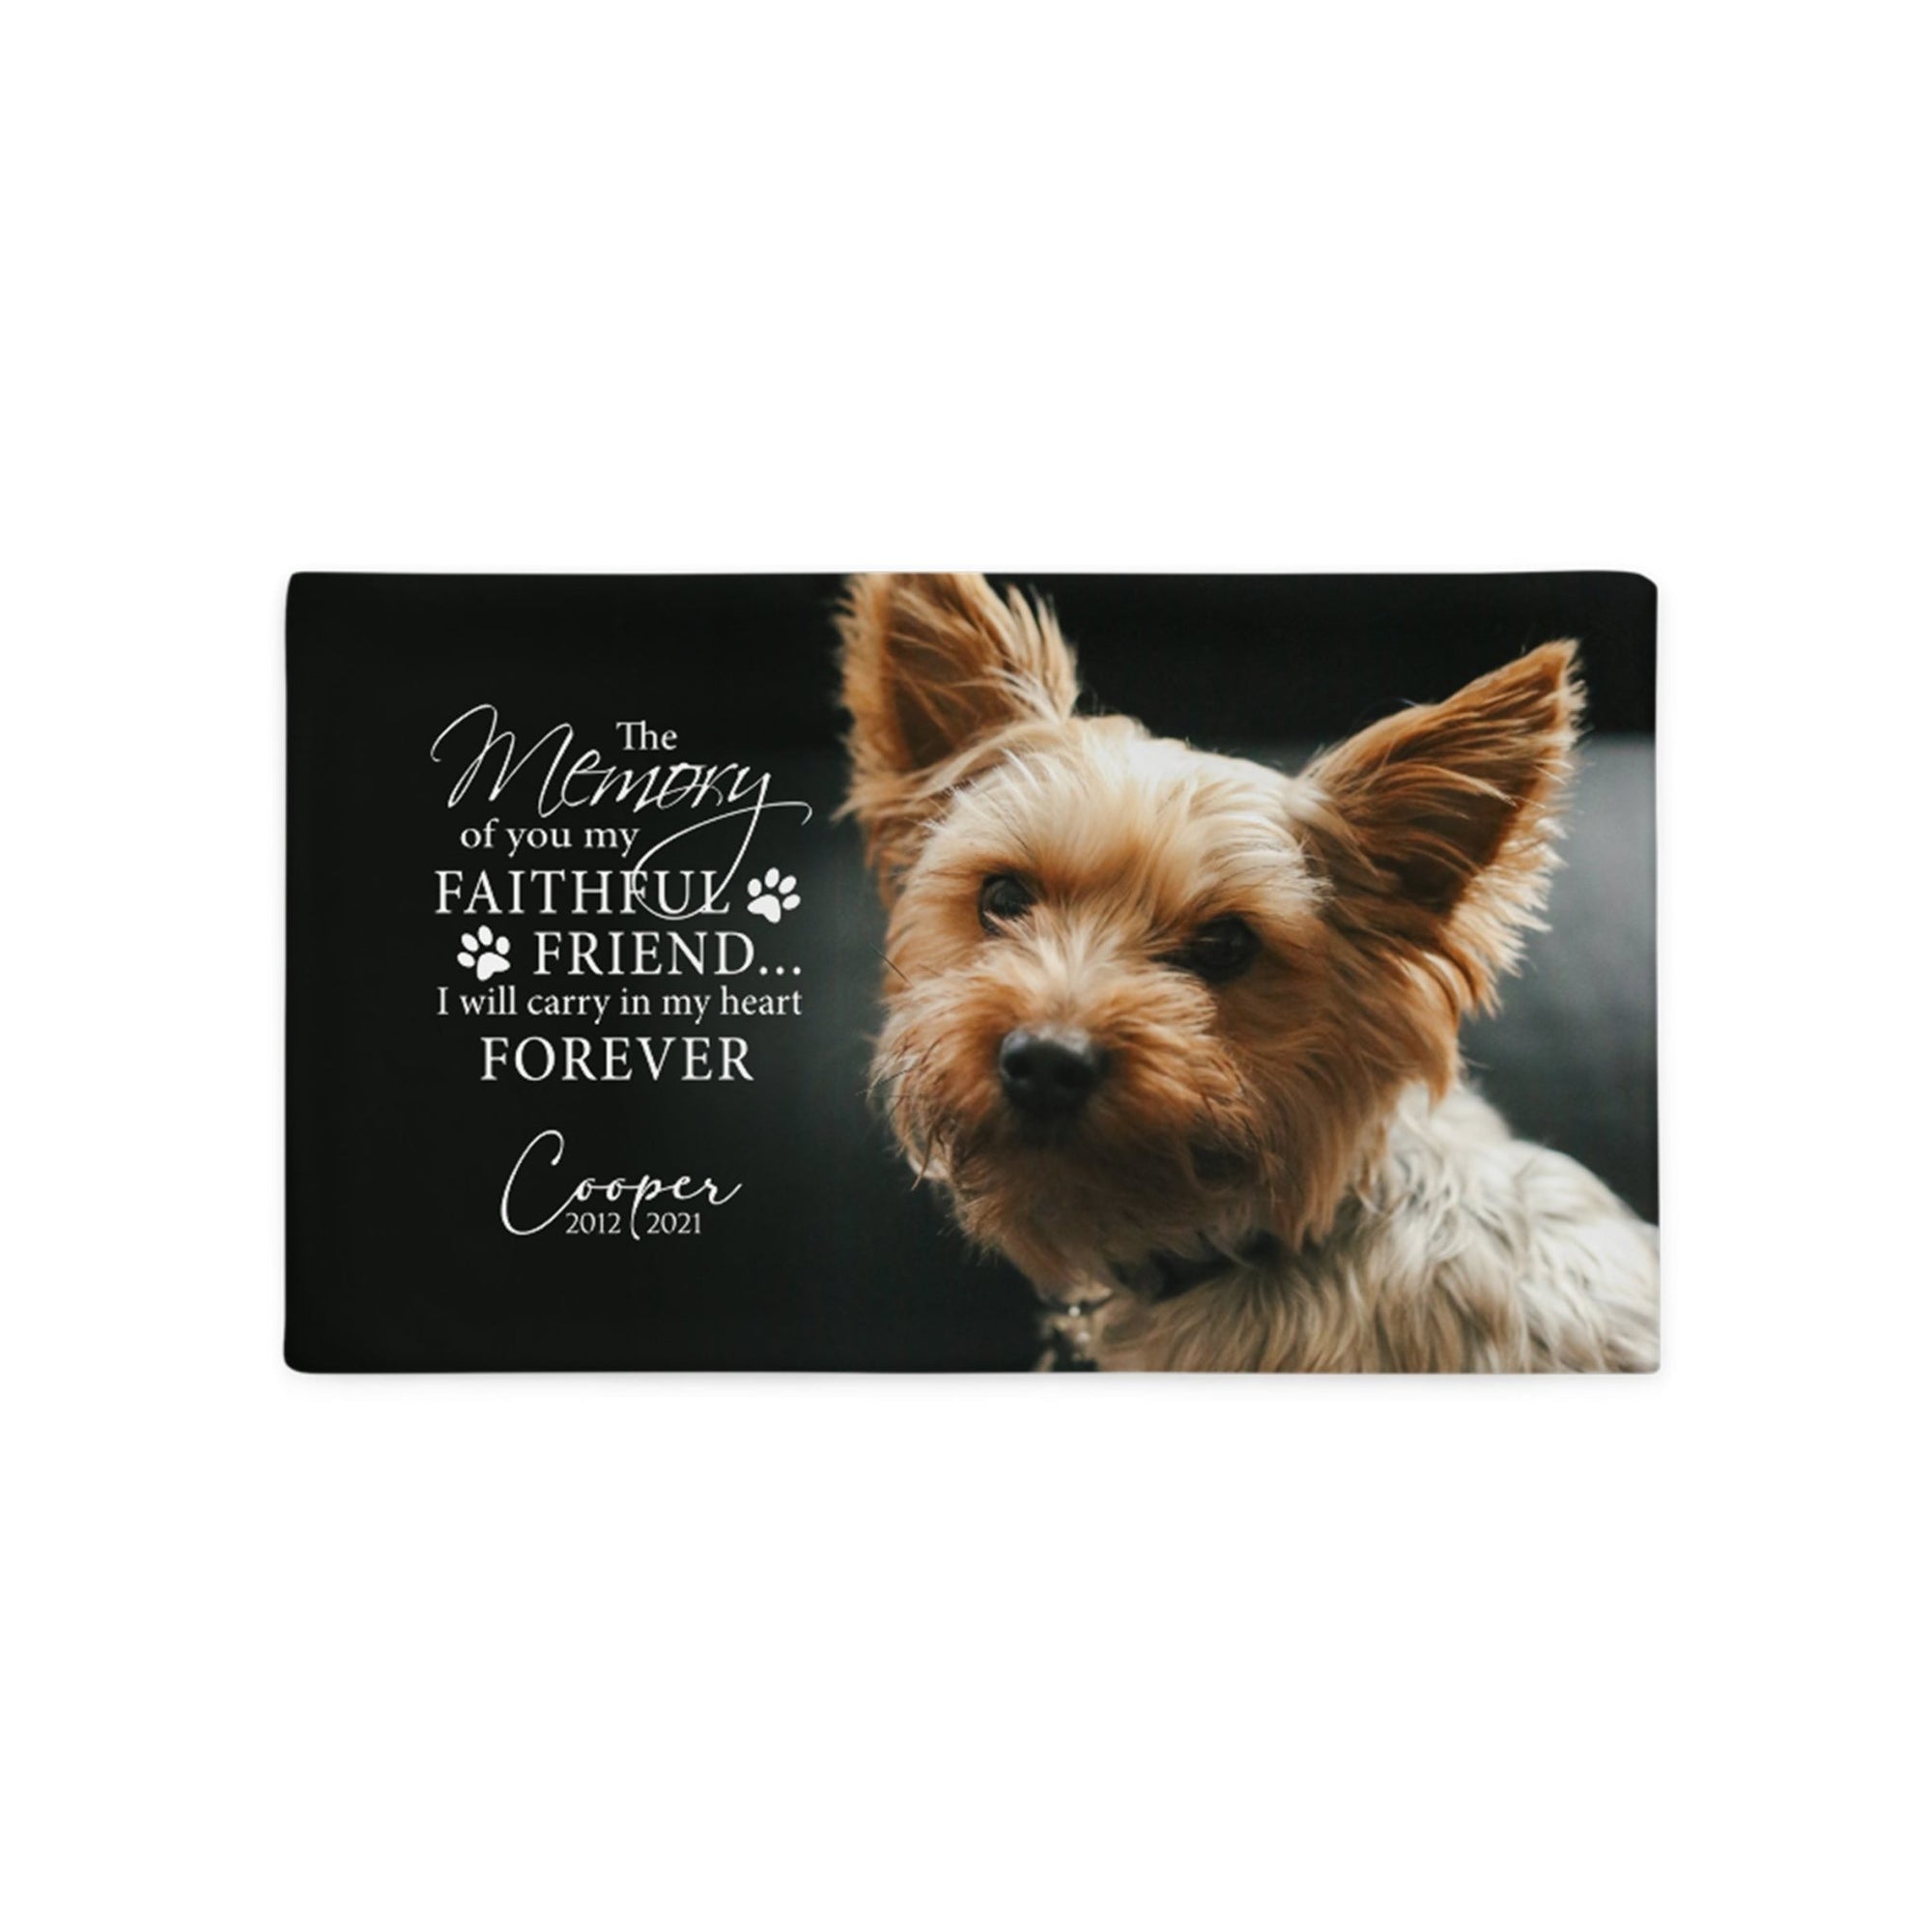 Personalized Pet Memorial Printed Throw Pillow Case - The Memory of You - LifeSong Milestones